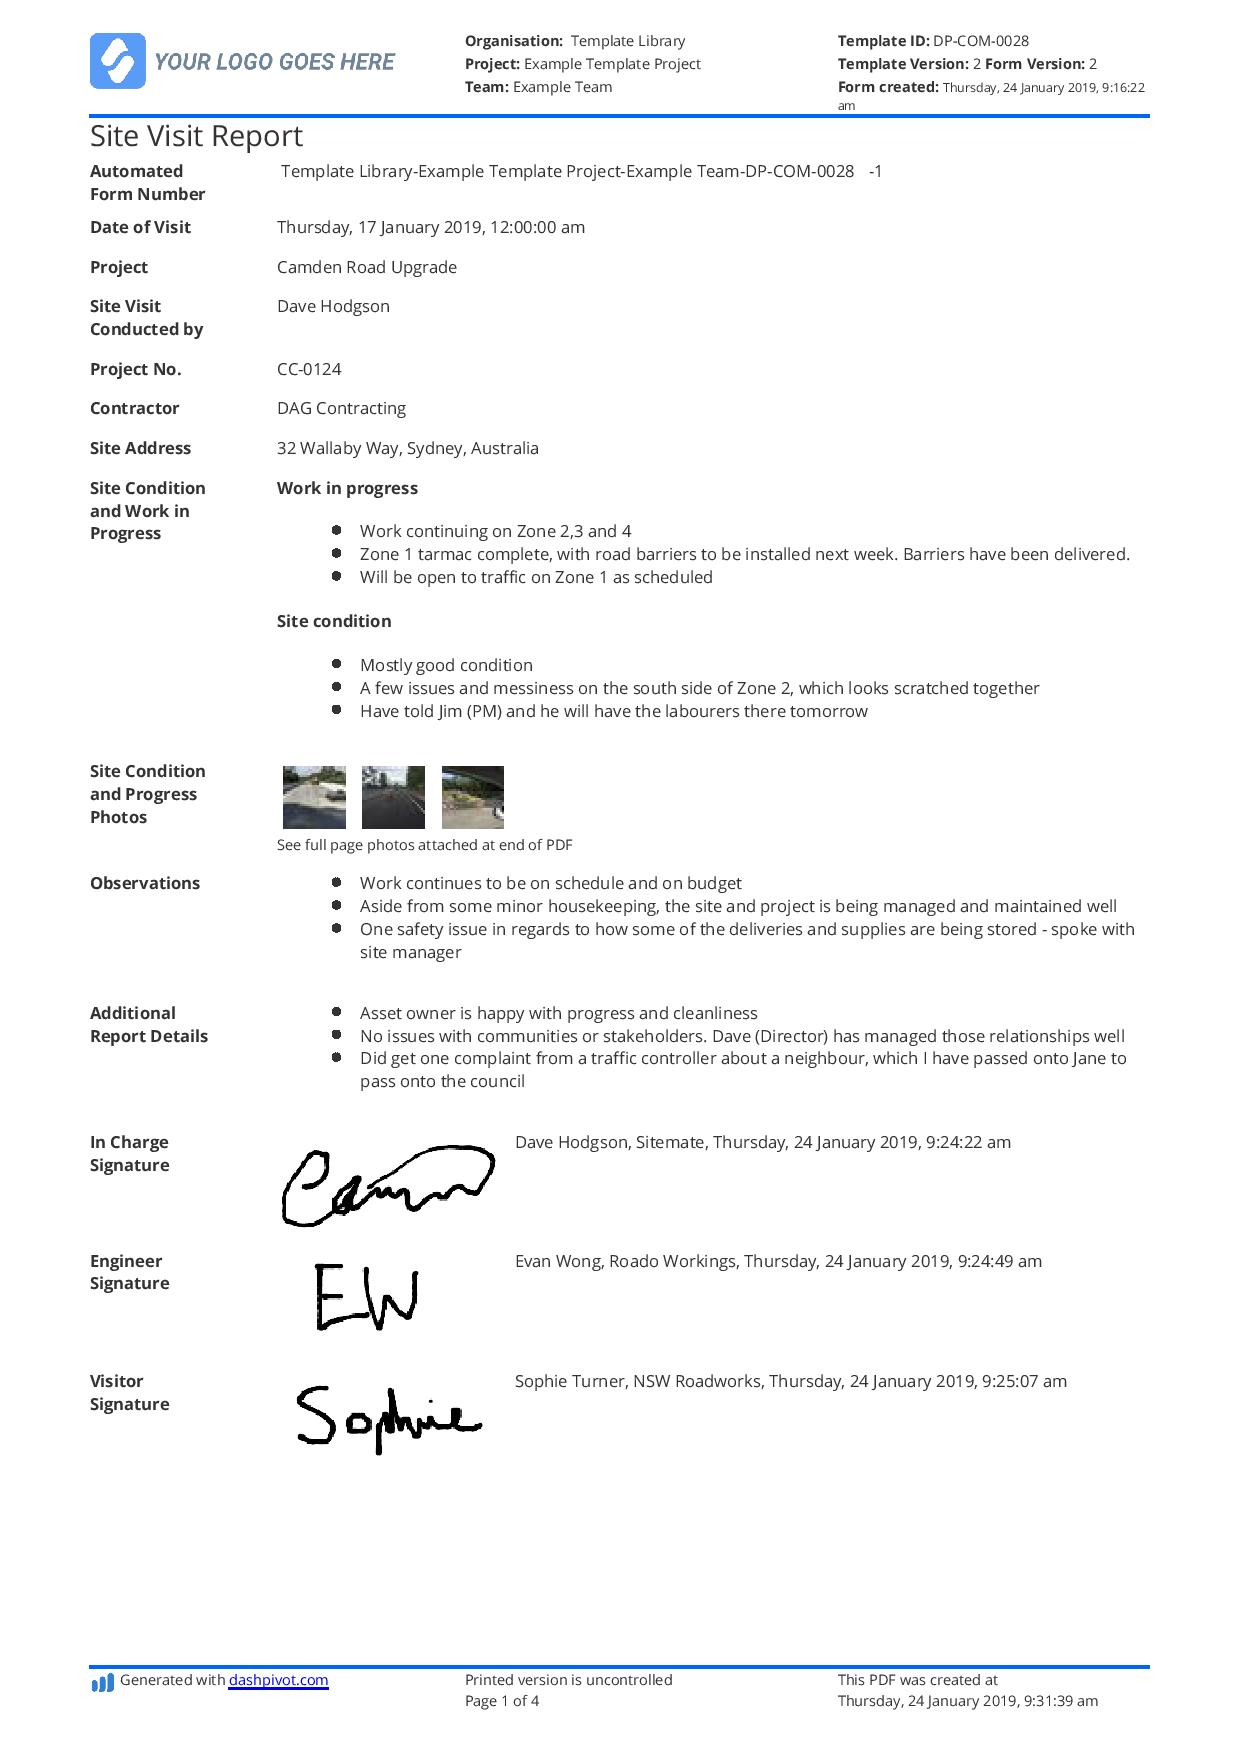 Construction Site Visit Report Template And Sample [Free To Use] Intended For Customer Visit Report Format Templates